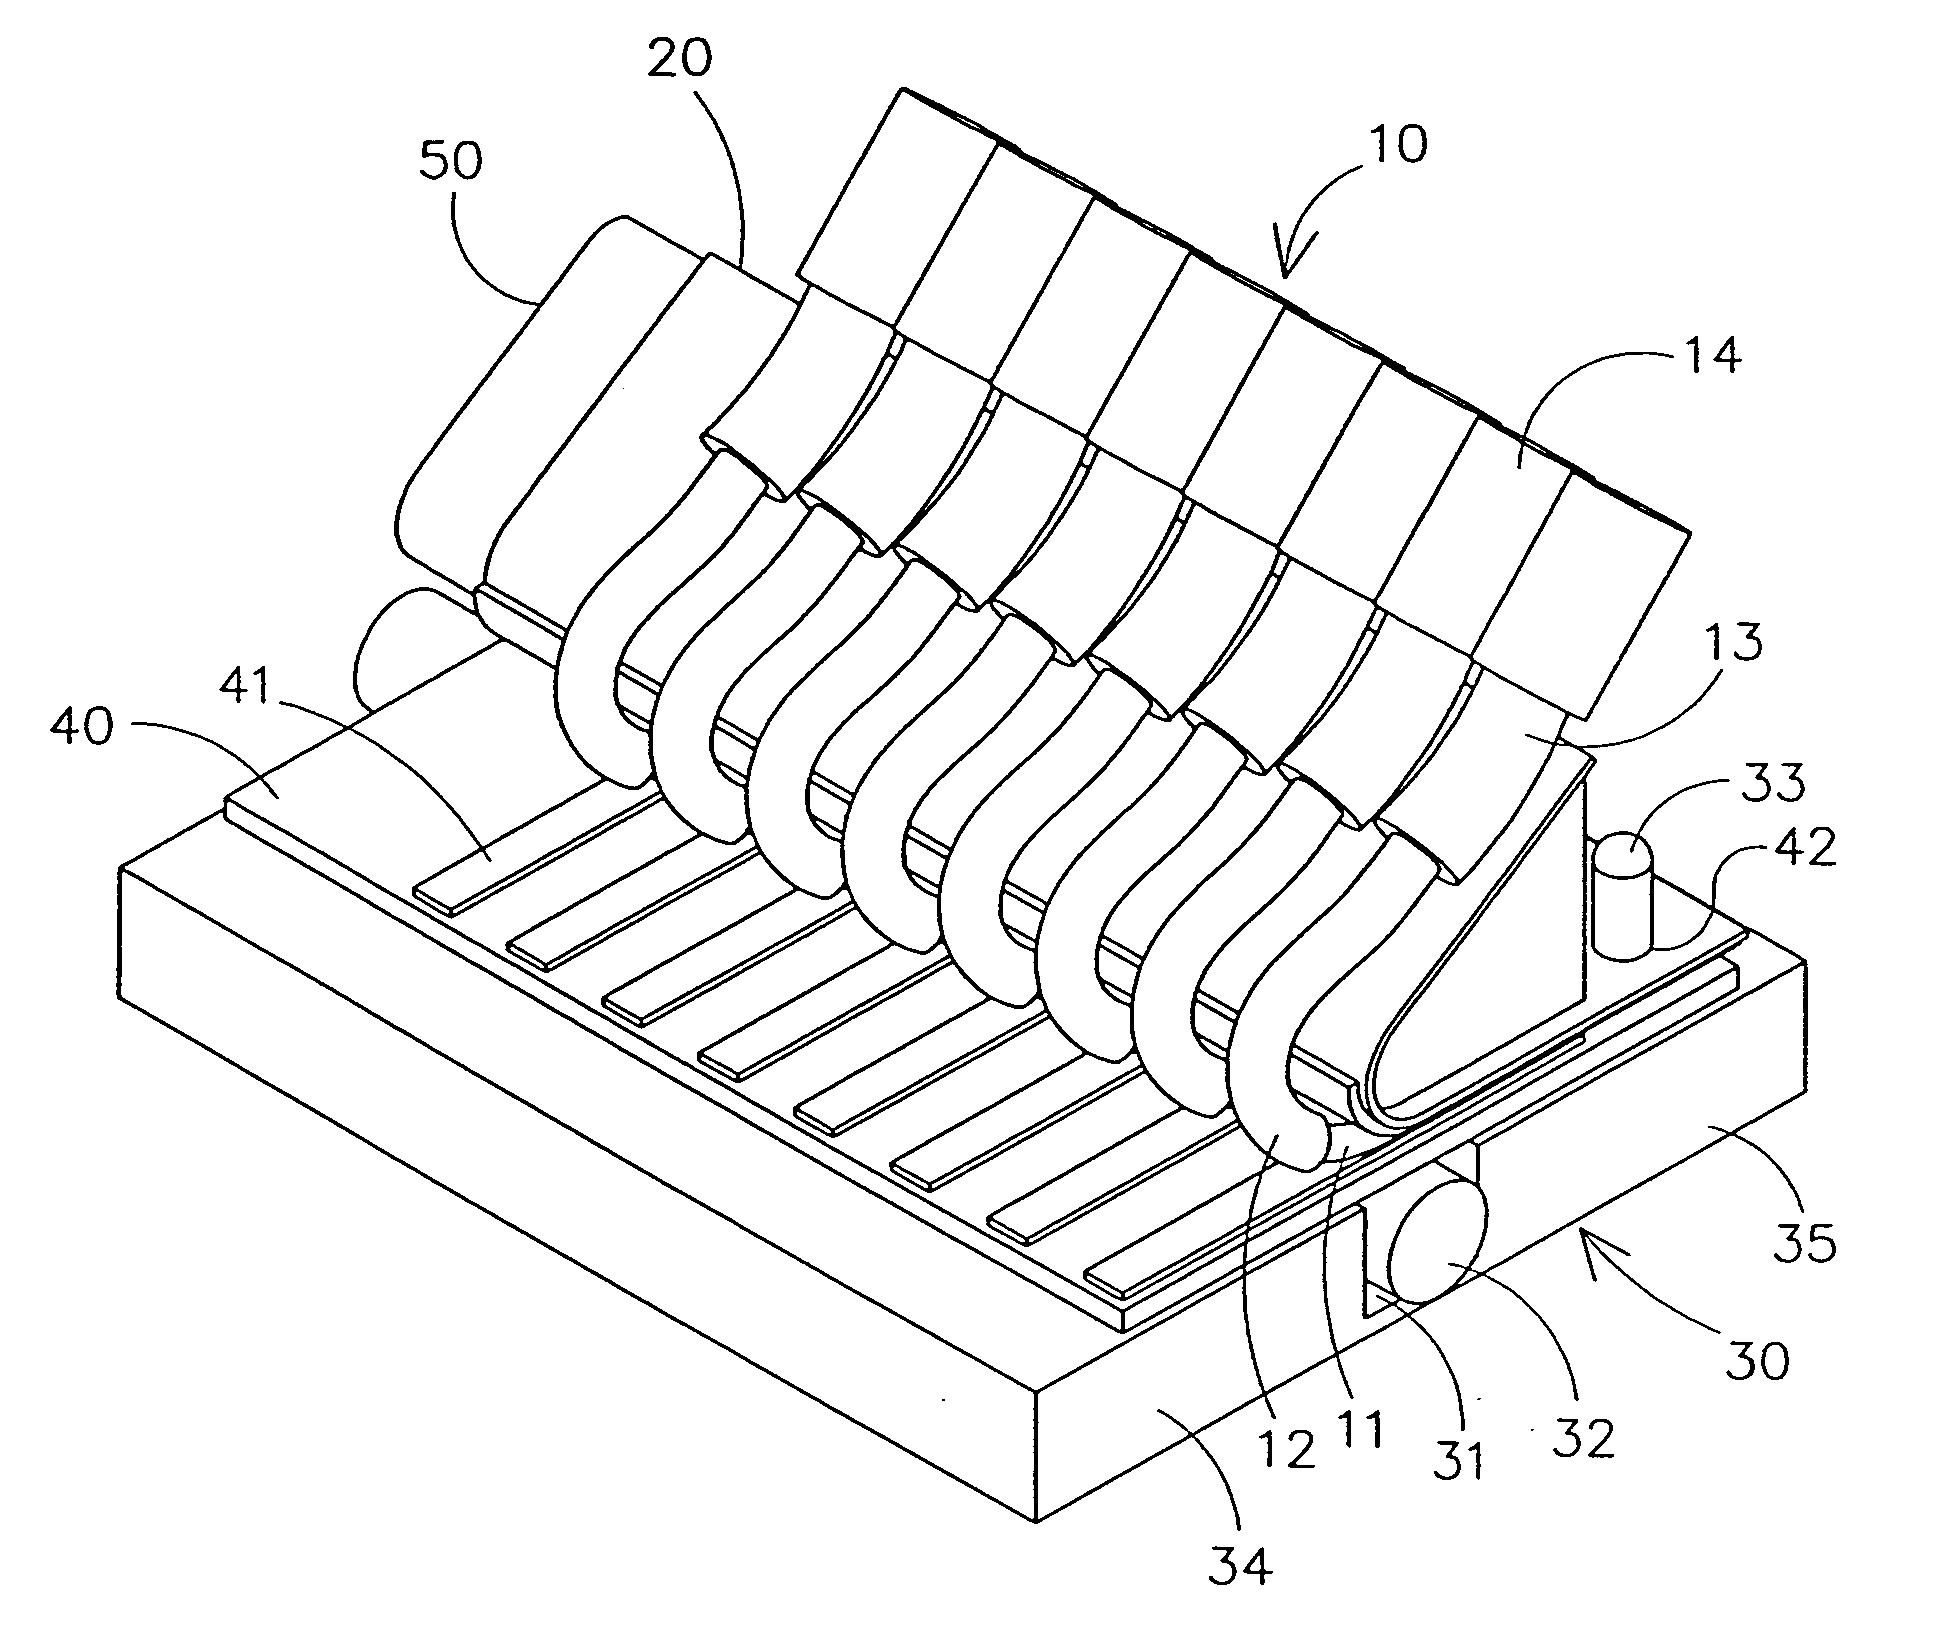 Method and apparatus for connecting multiple coaxial cables to a printed circuit board in a compact